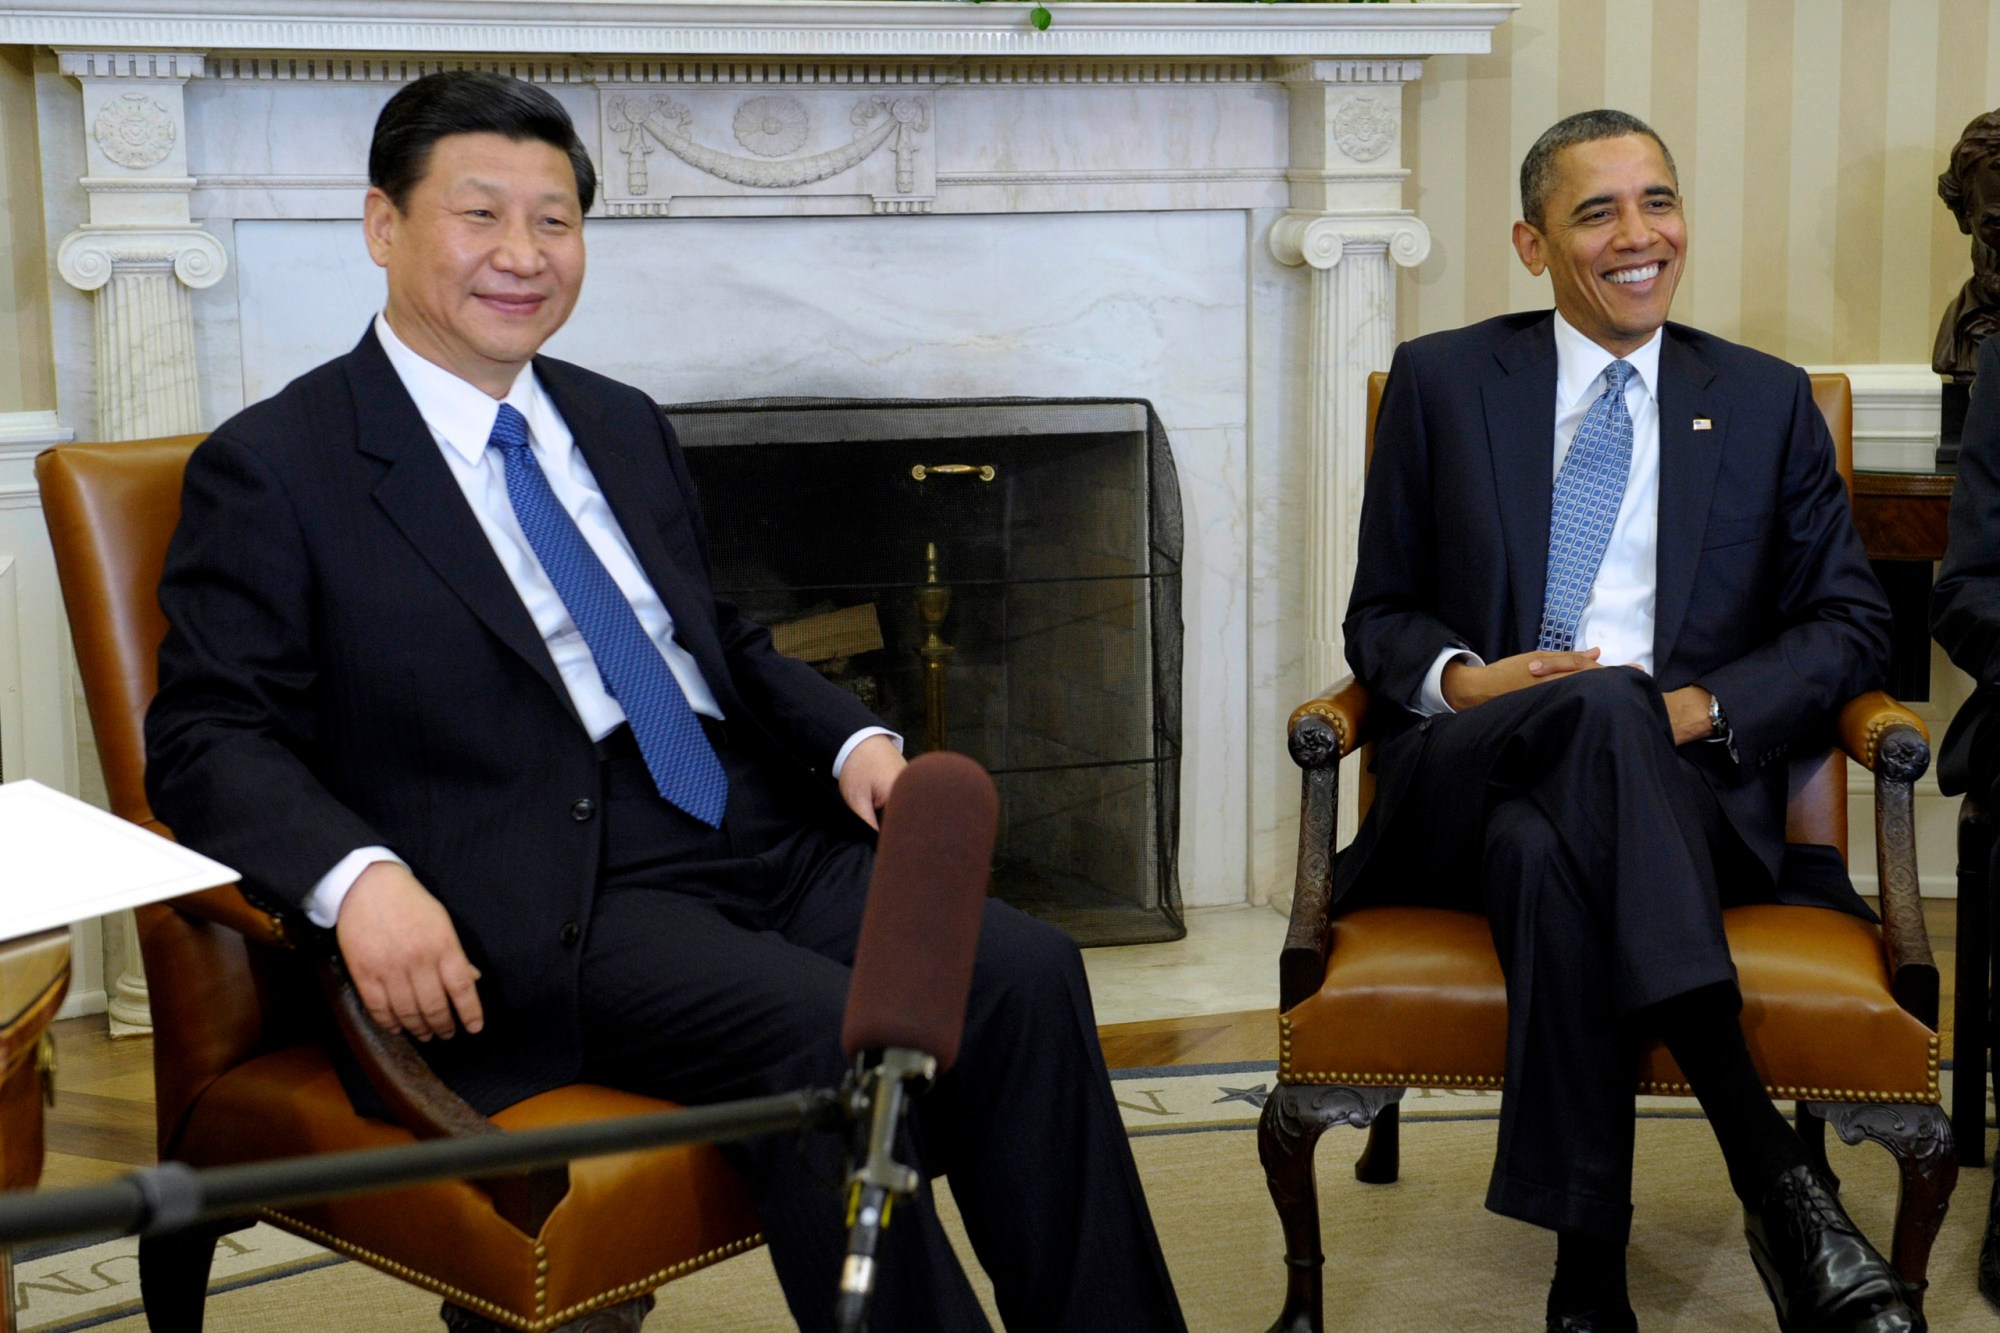 U.S. President Barack Obama meets with then-Chinese Vice President Xi Jinping in Washington on February 14, 2012. Obama and Xi, now Chinese president, face weighty issues when they meet at a private estate in California this month. (AP/Susan Walsh)